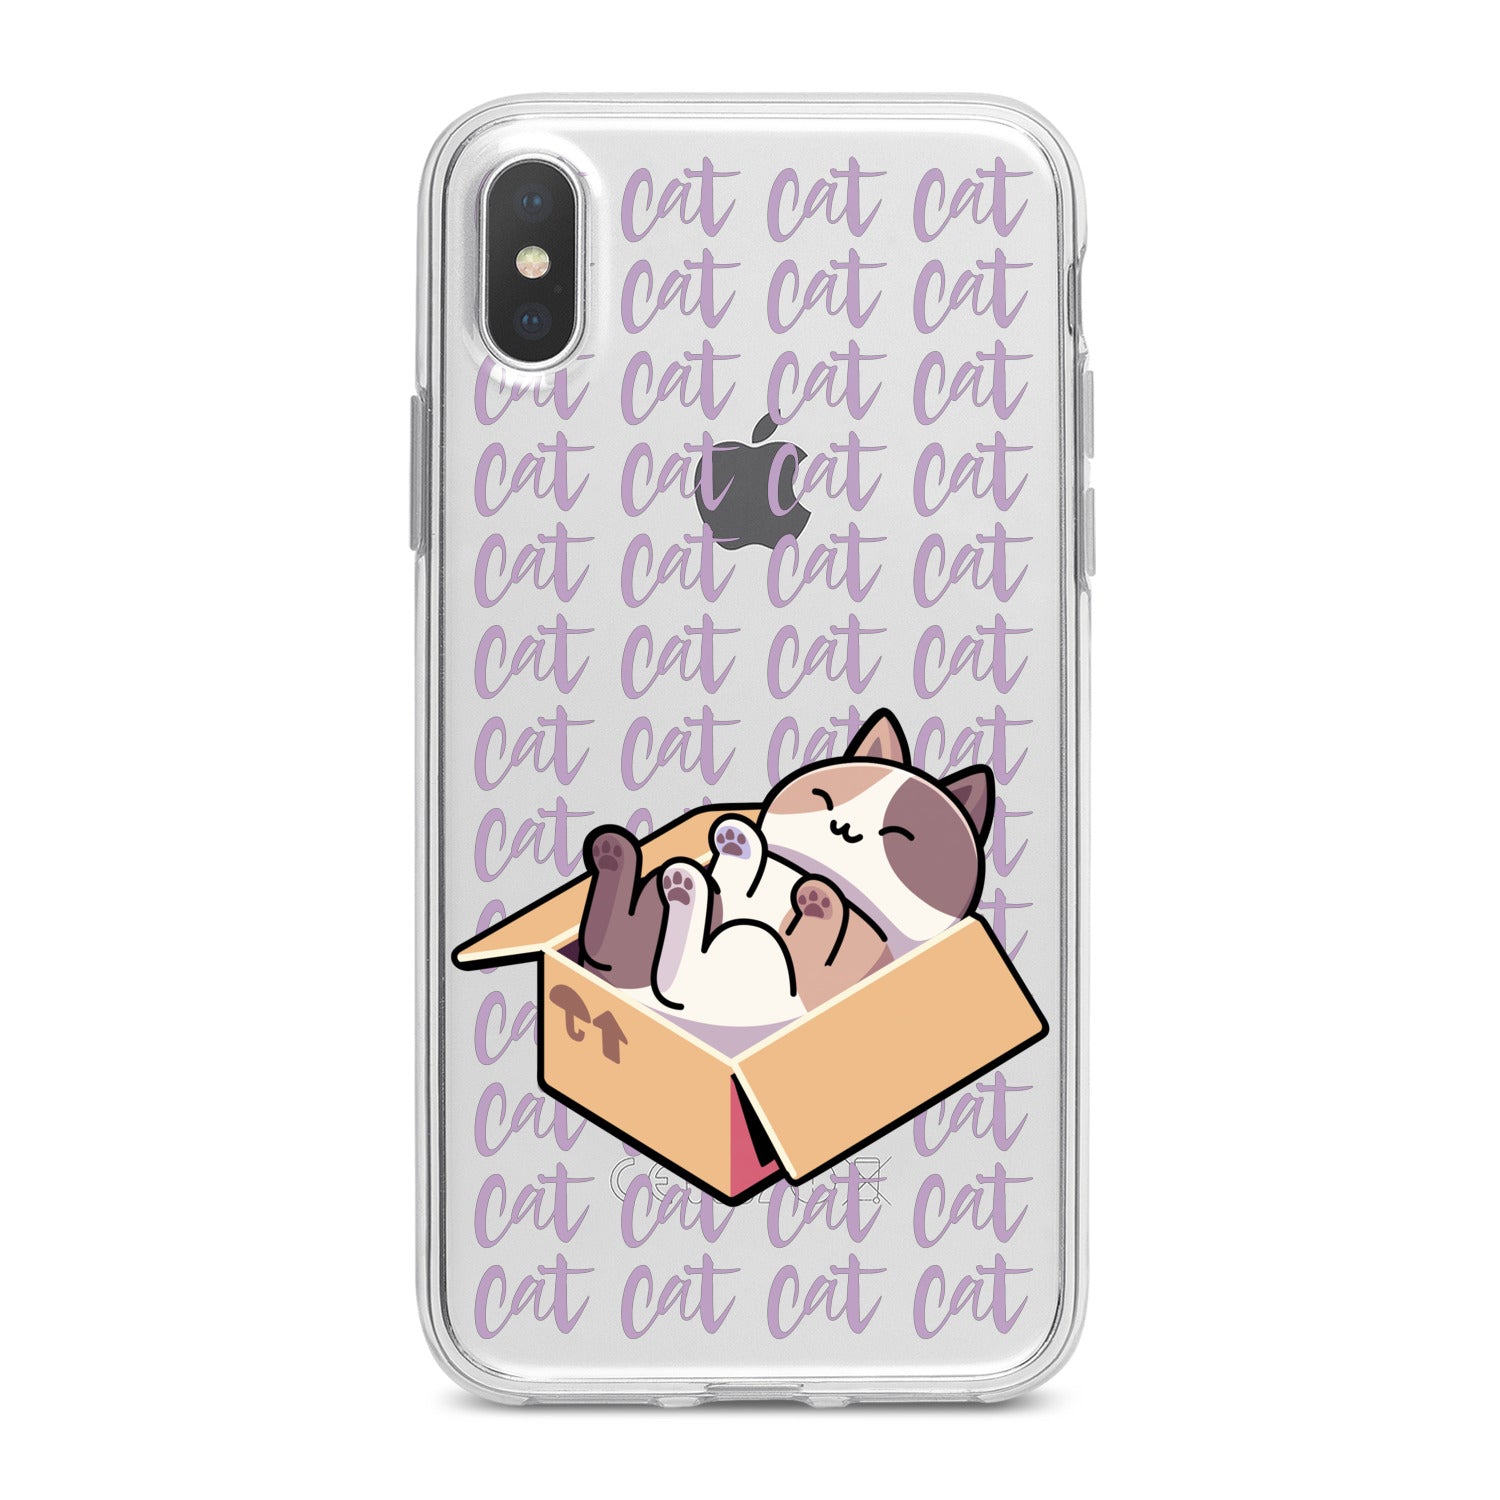 Lex Altern Sleepy Cat in Box Phone Case for your iPhone & Android phone.